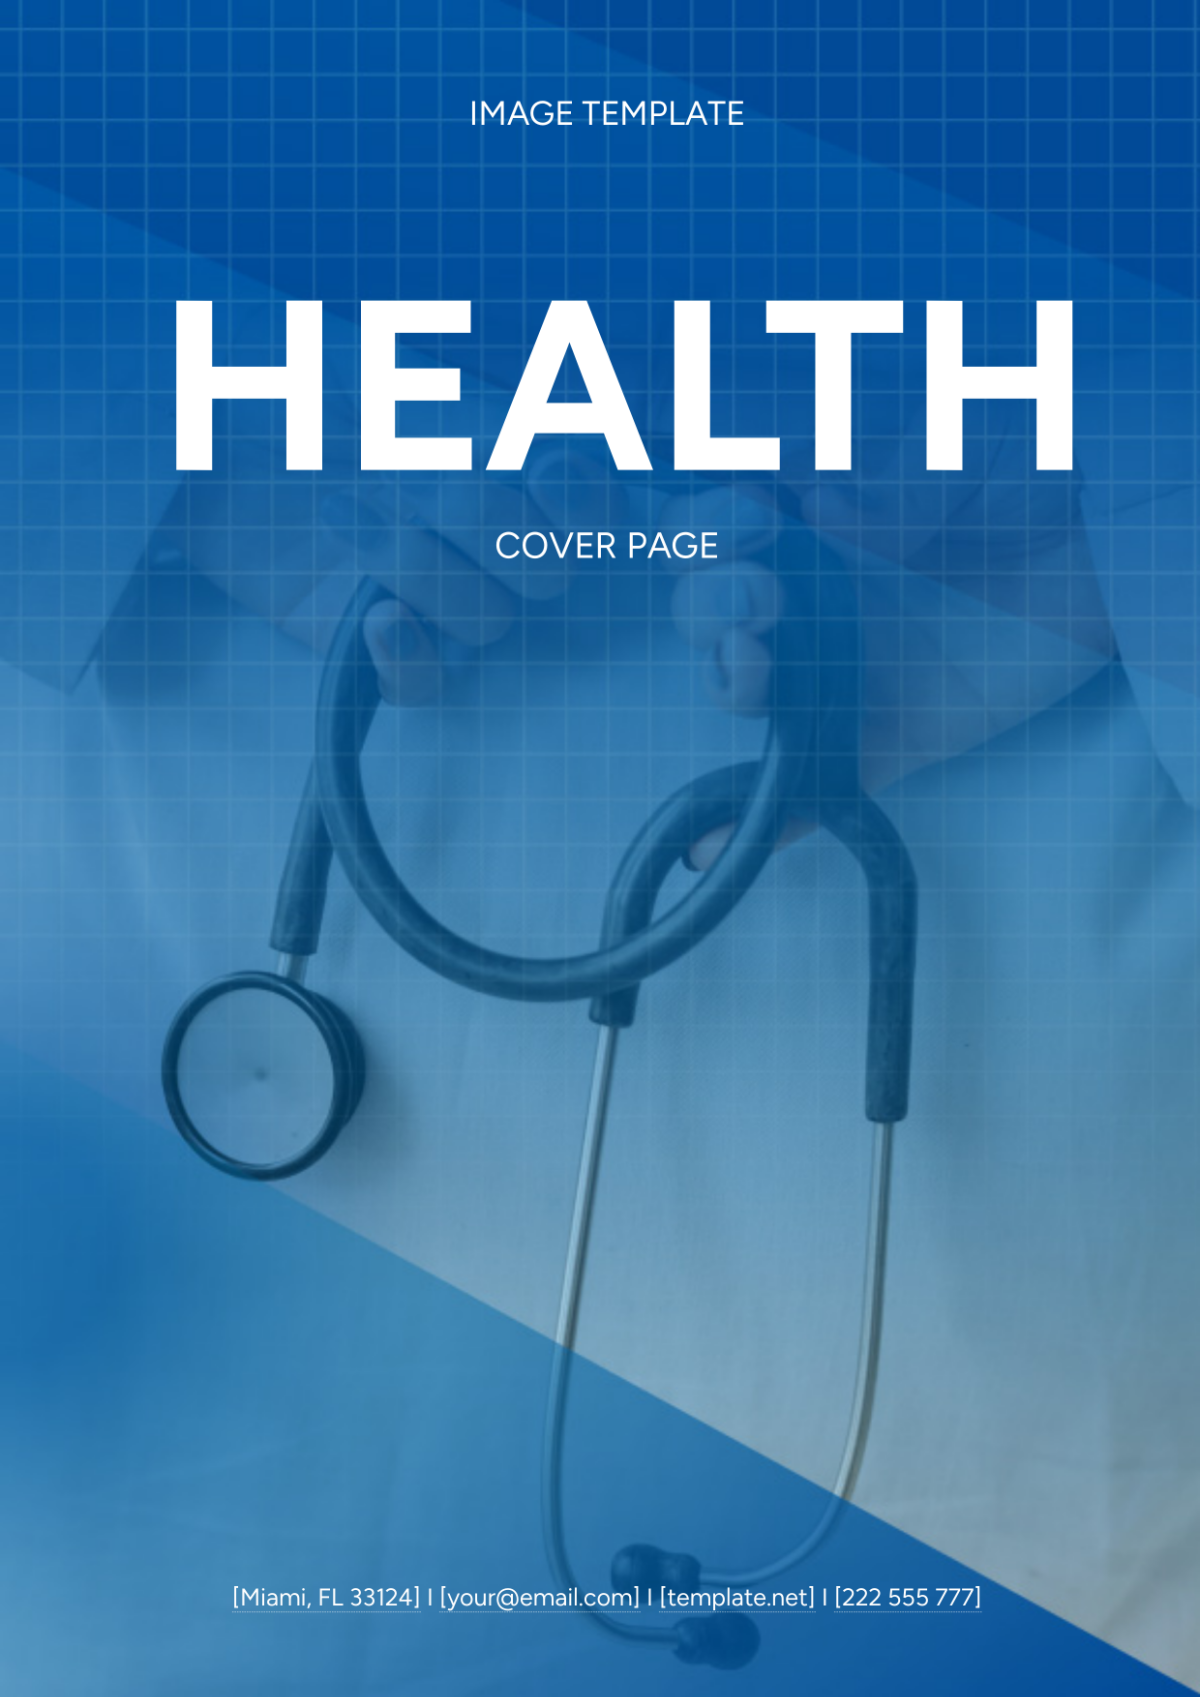 Health Cover Page Image